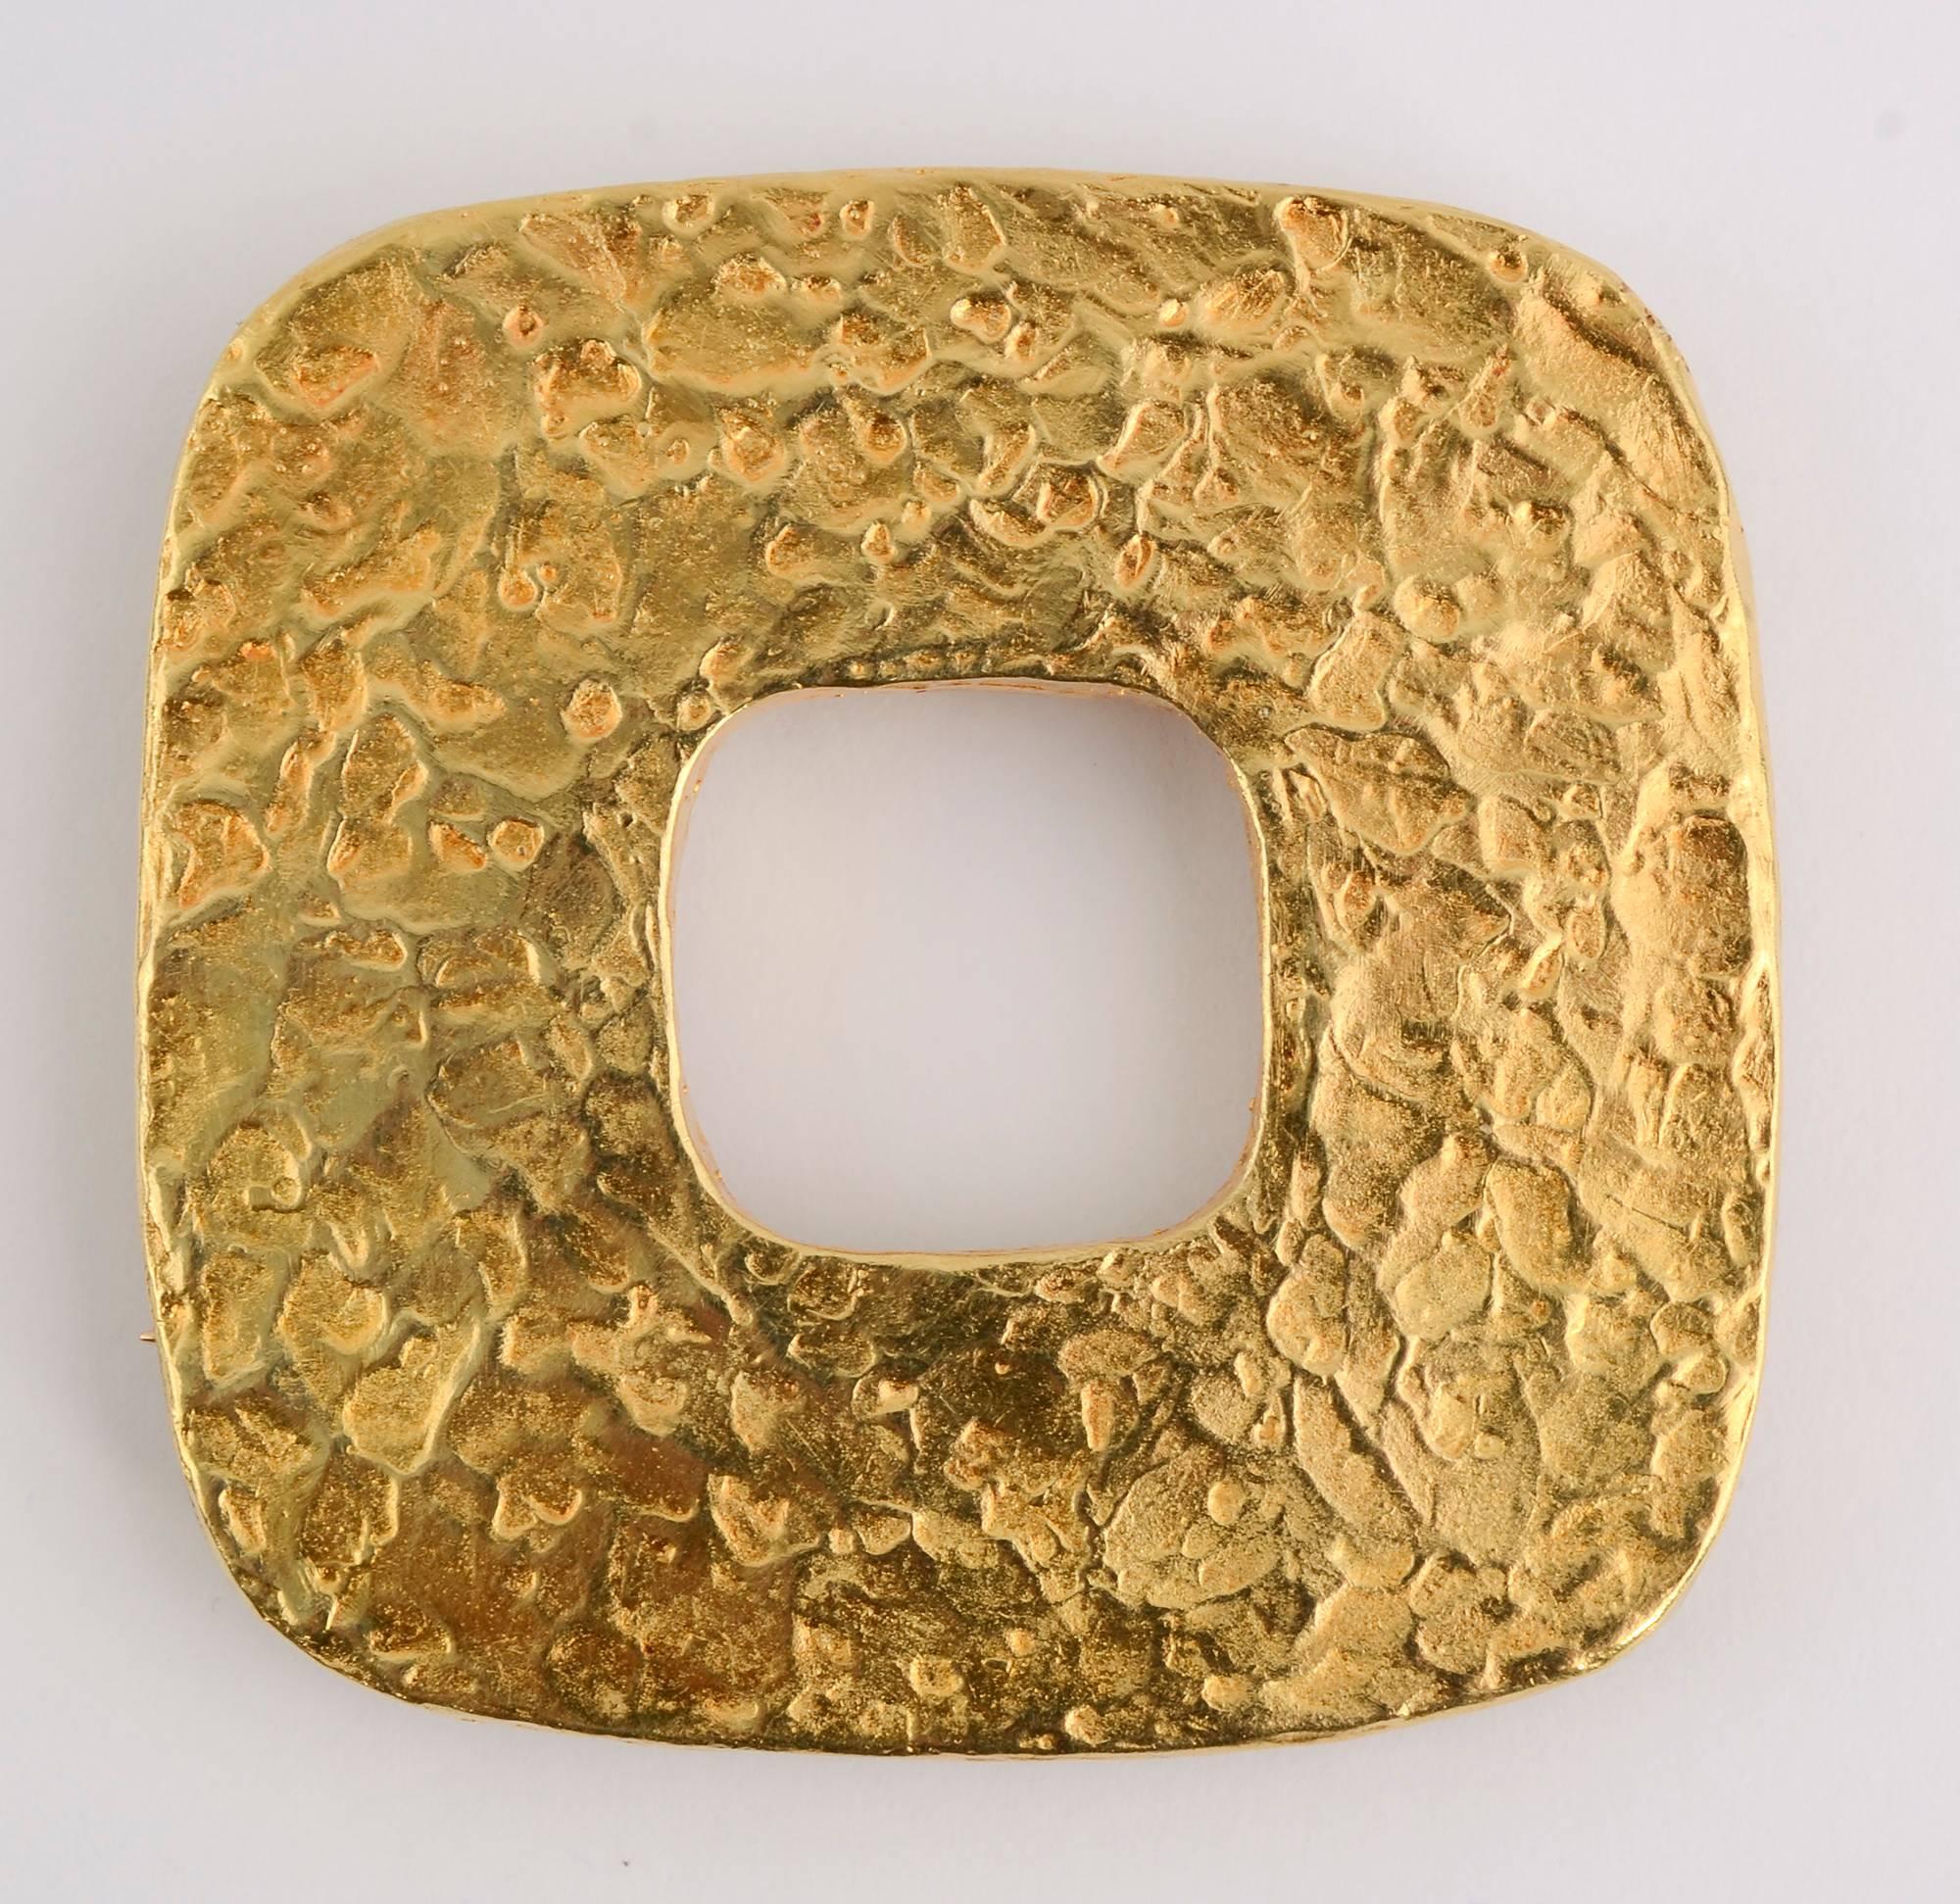 Highly textured and versatile pendant/ brooch by famed Modernist designer, Ed Wiener.
The piece has loops so that it can be hung on a chain either on square or on point. The pin stem is for it to be worn on square.
The piece weighs 39 grams. It